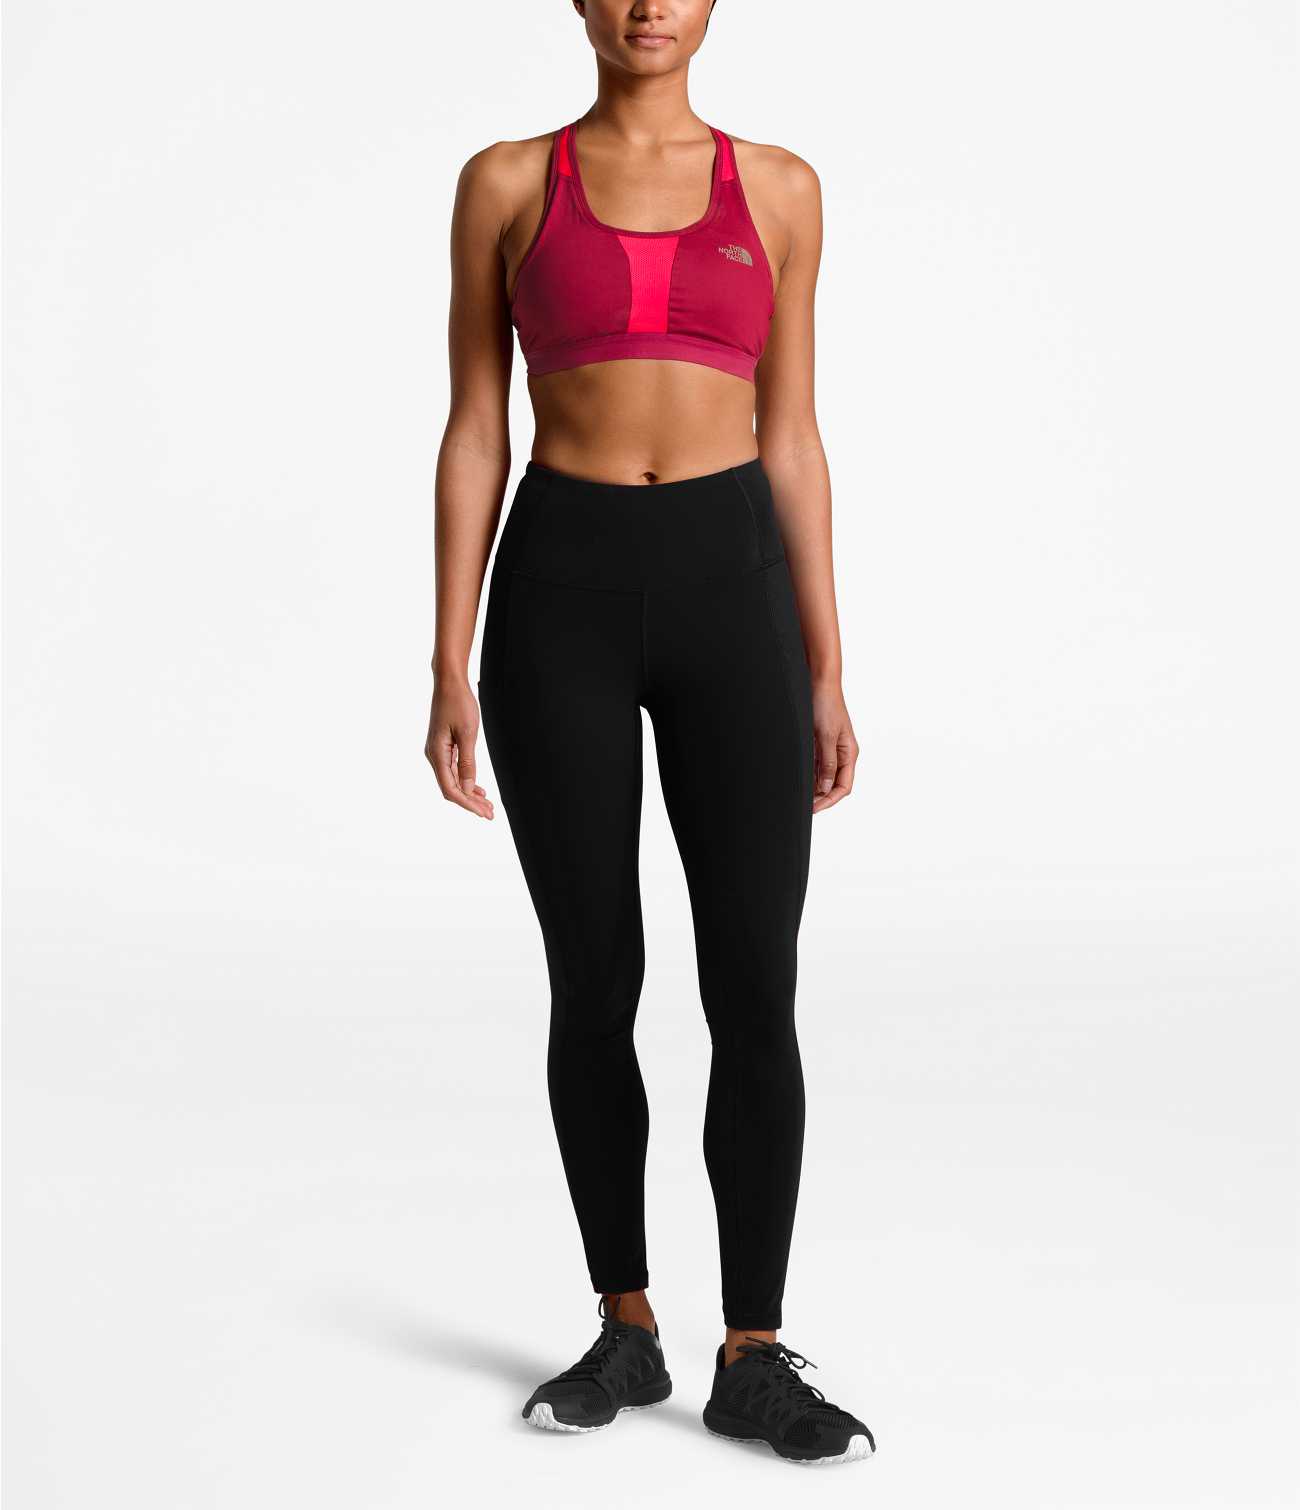 Women's The North Face Activewear Leggings